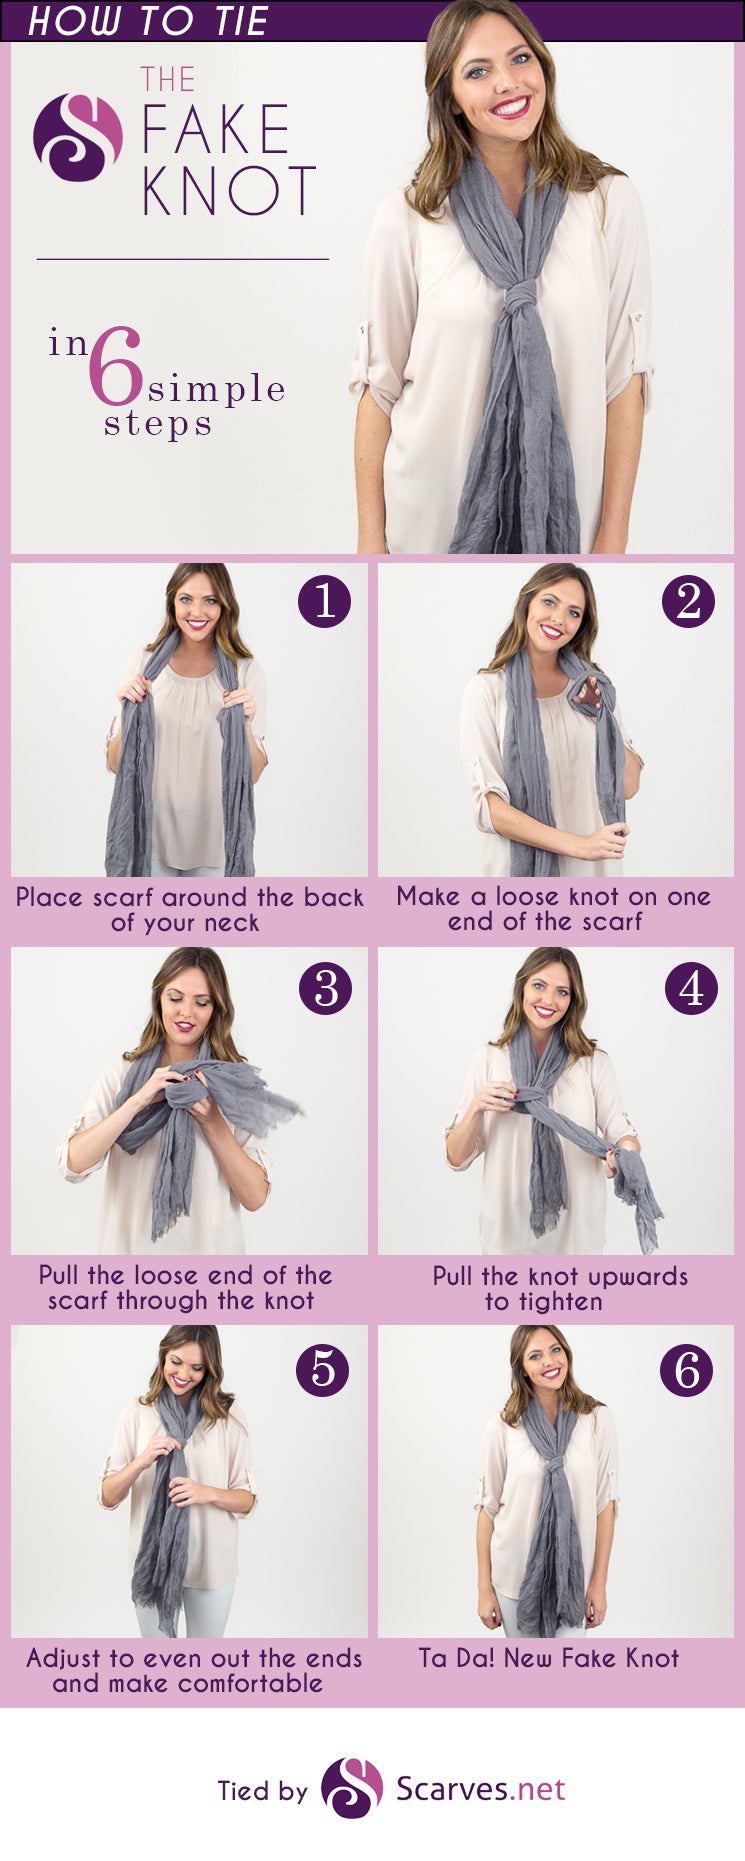 Fake Knot in 6 simple steps